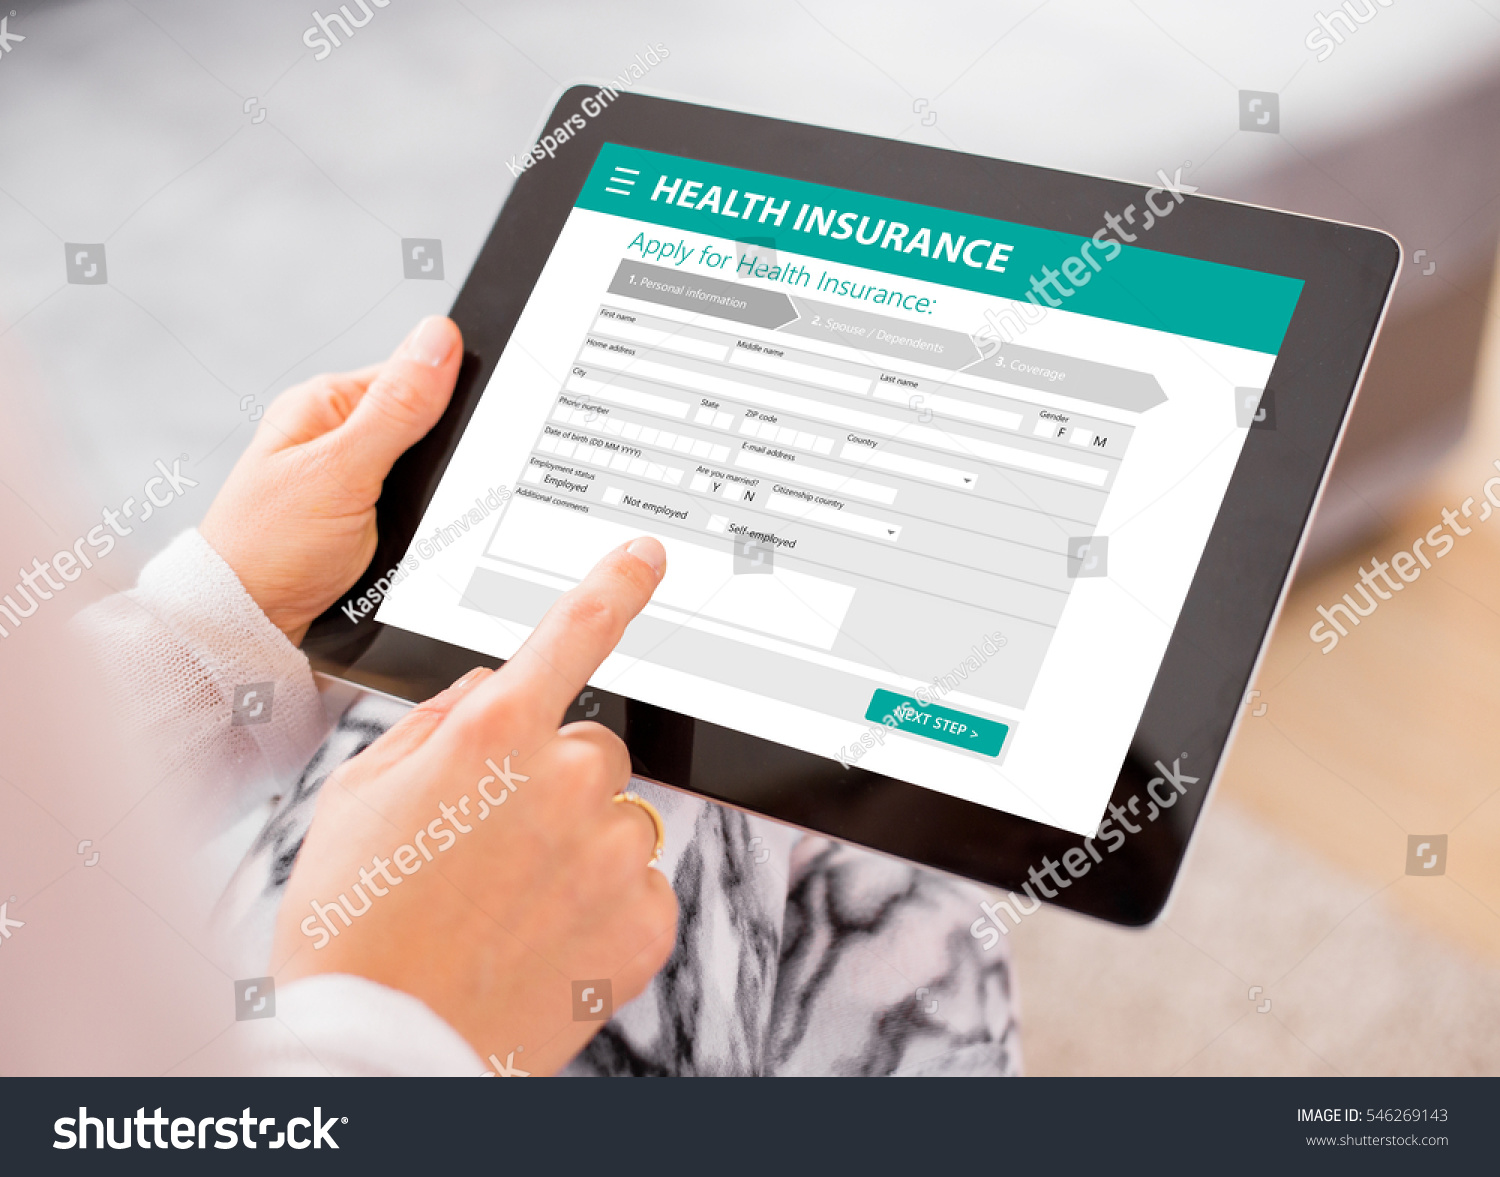 Health insurance application on tablet #546269143